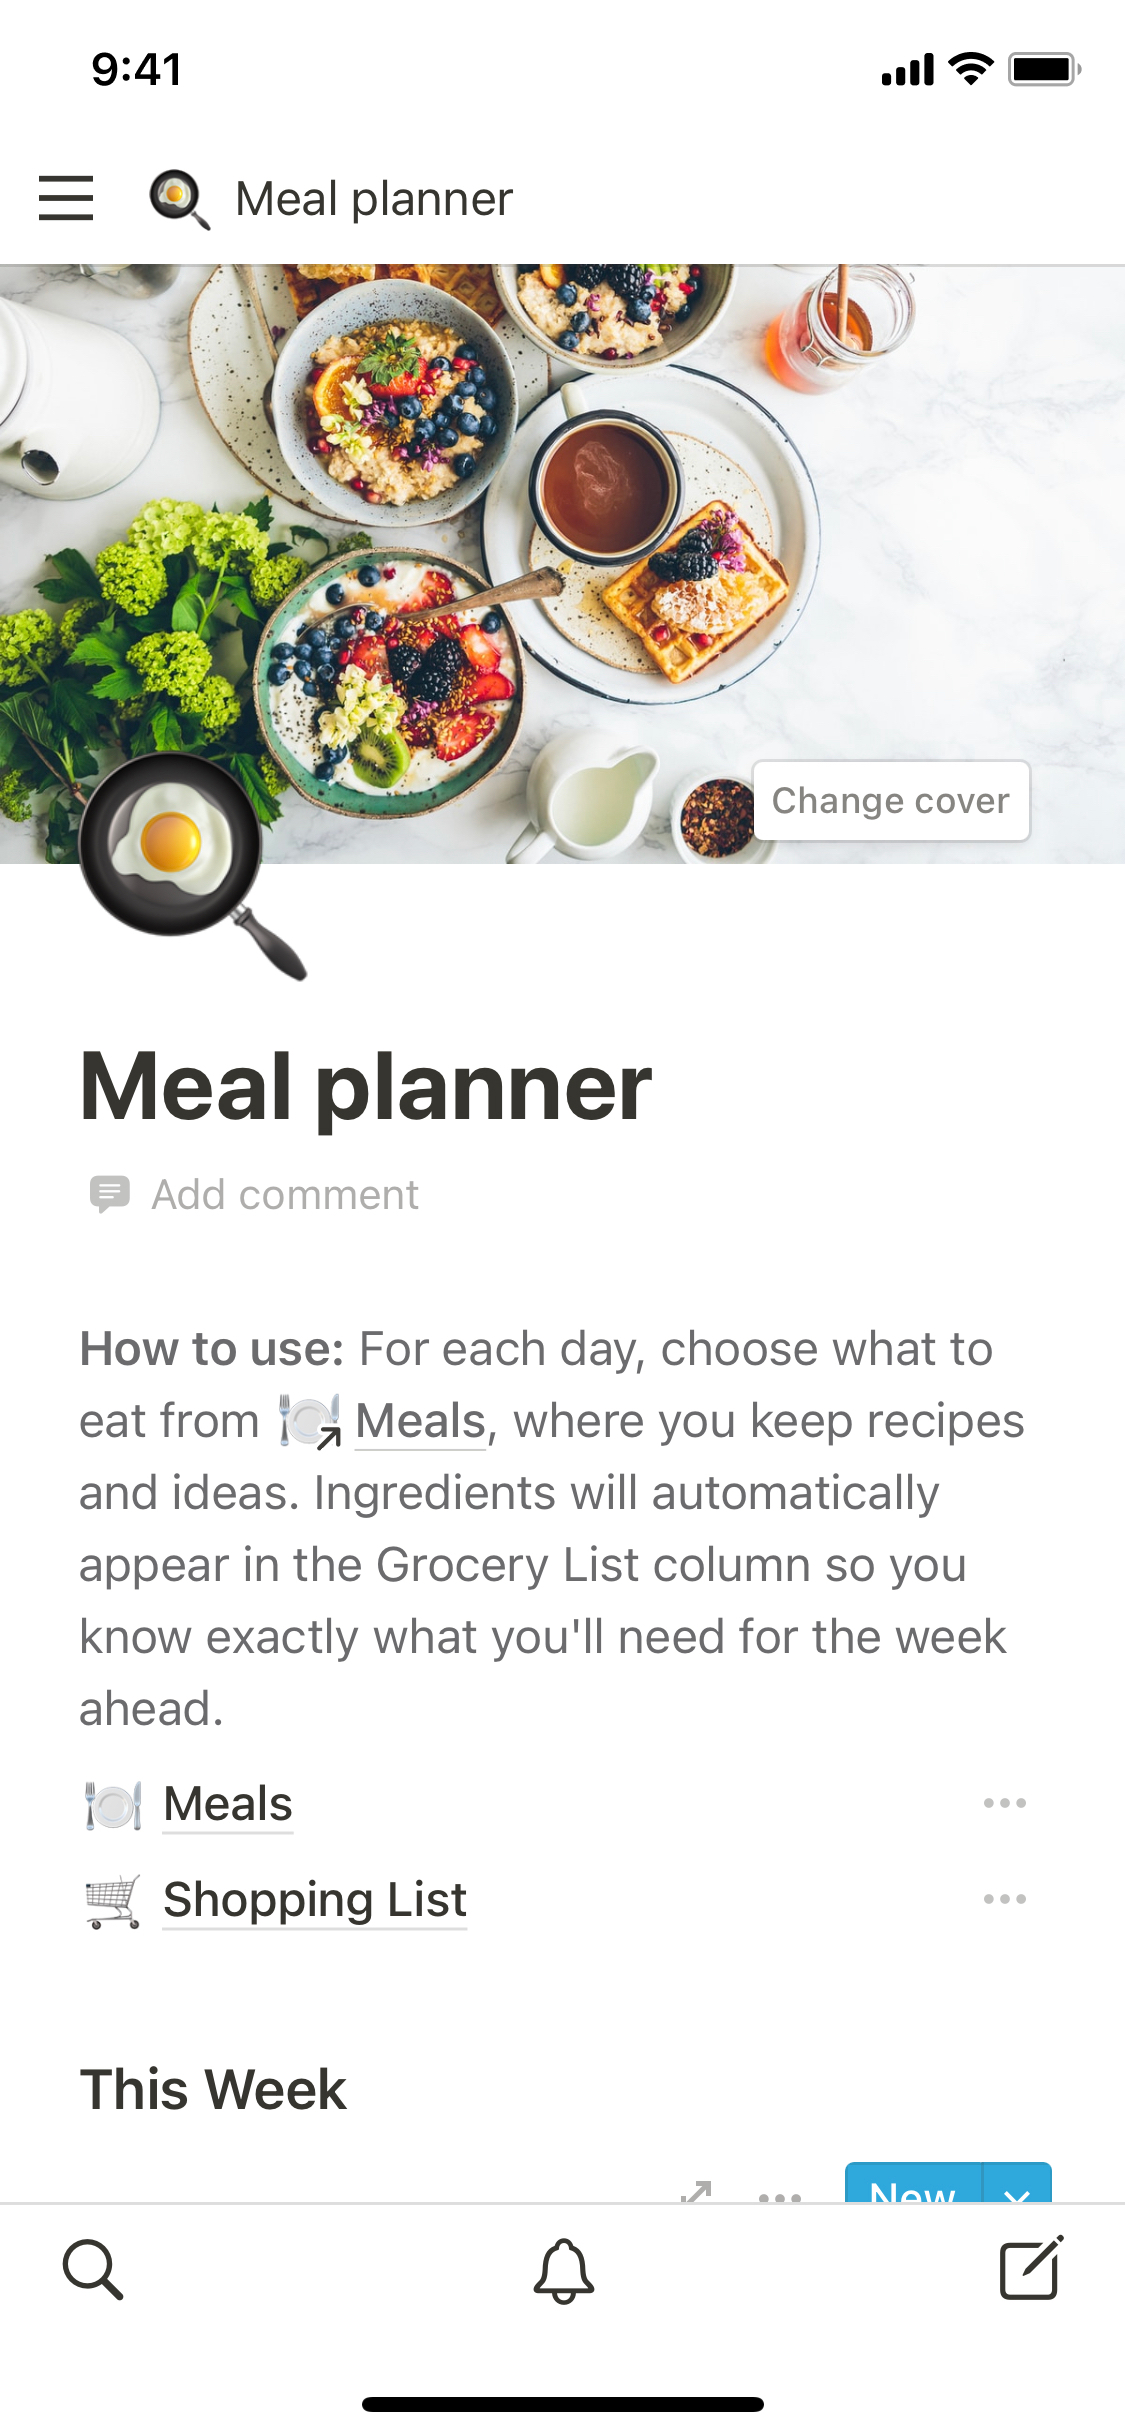 The mobile image for the Meal planner template